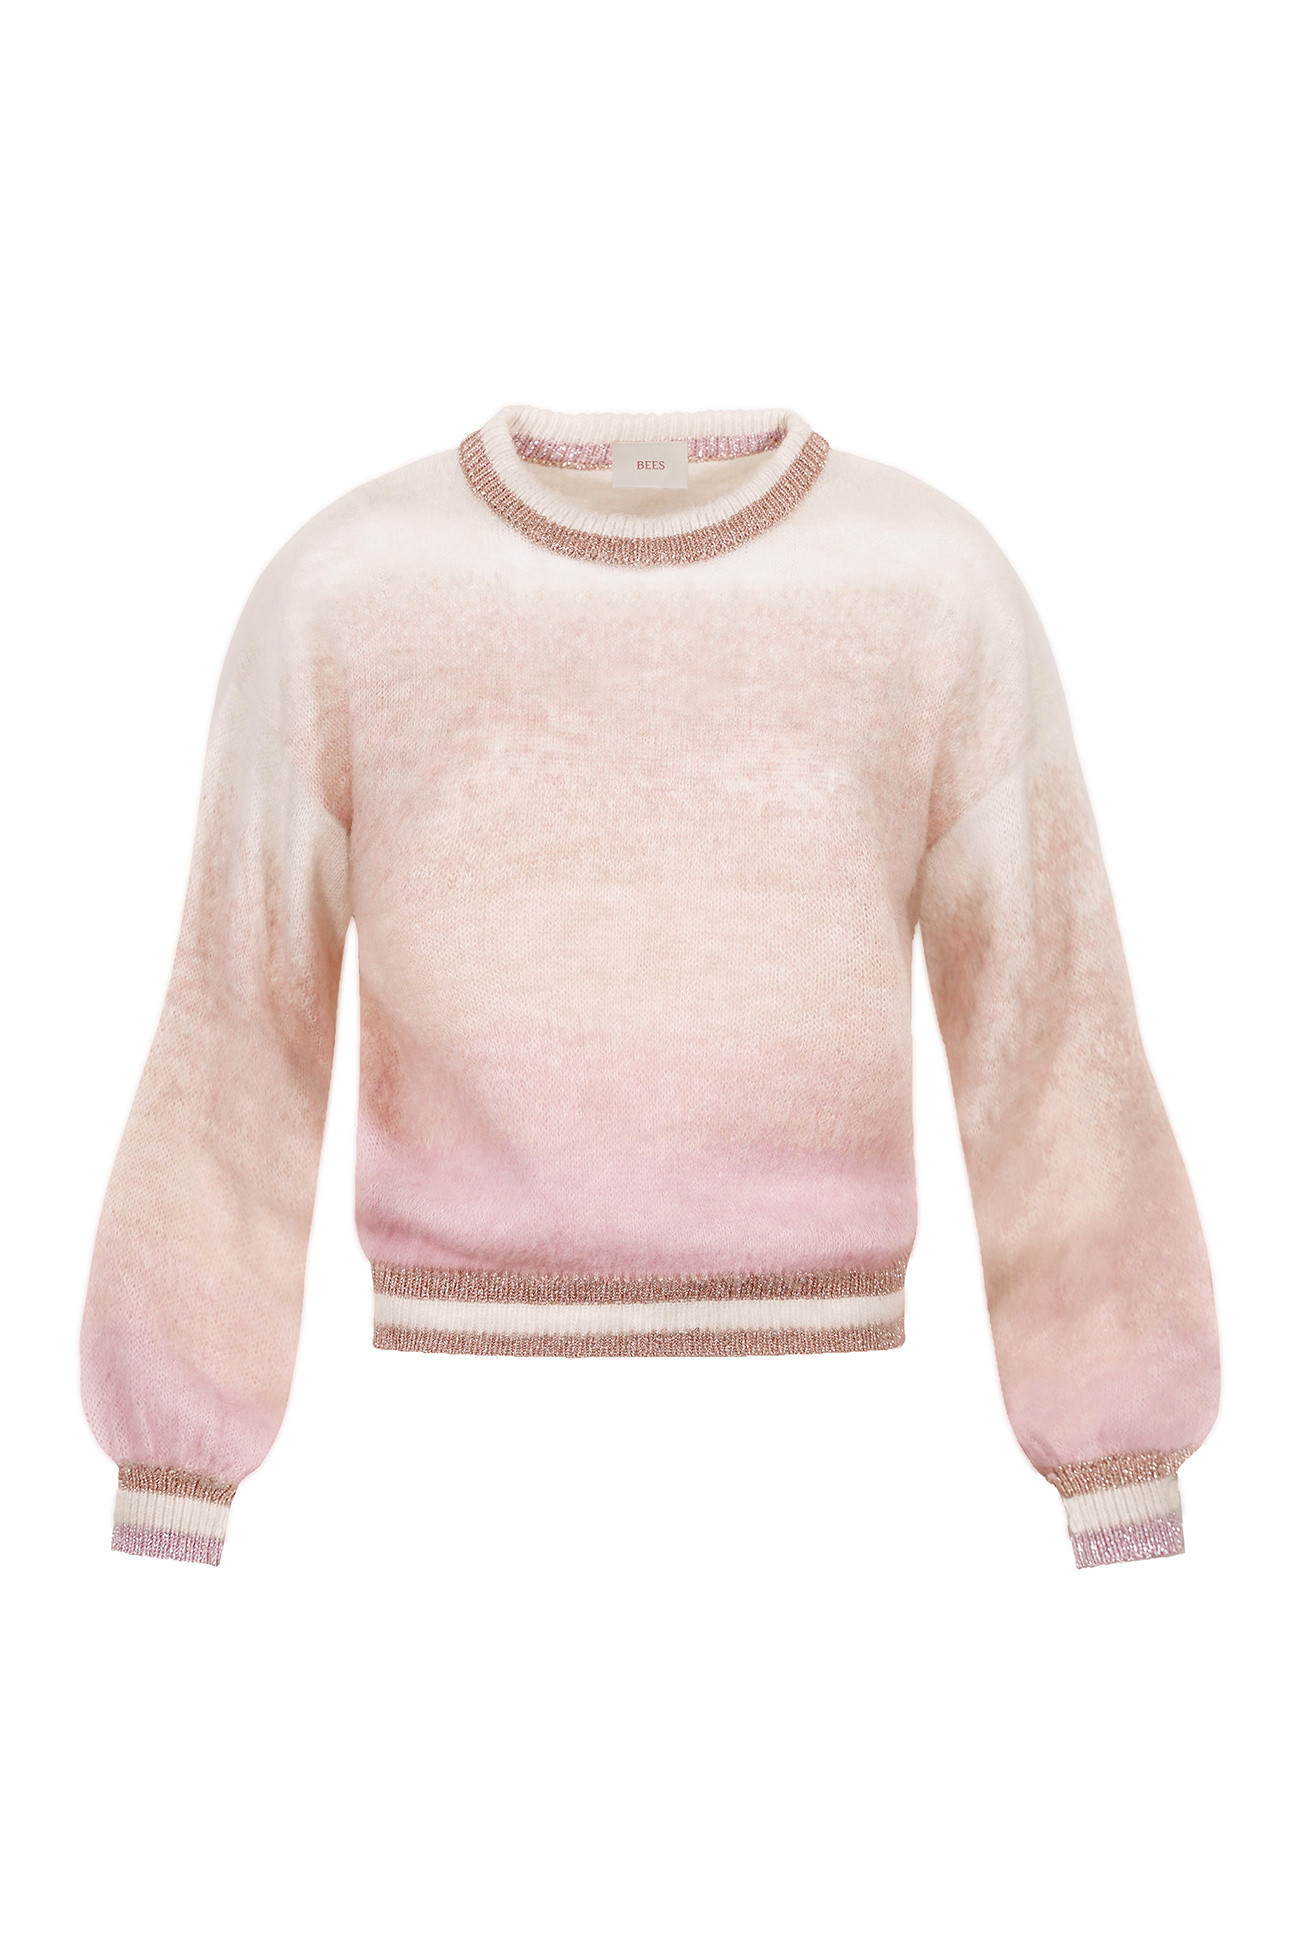 Bees - Annabel pullover, Pink, large image number 0